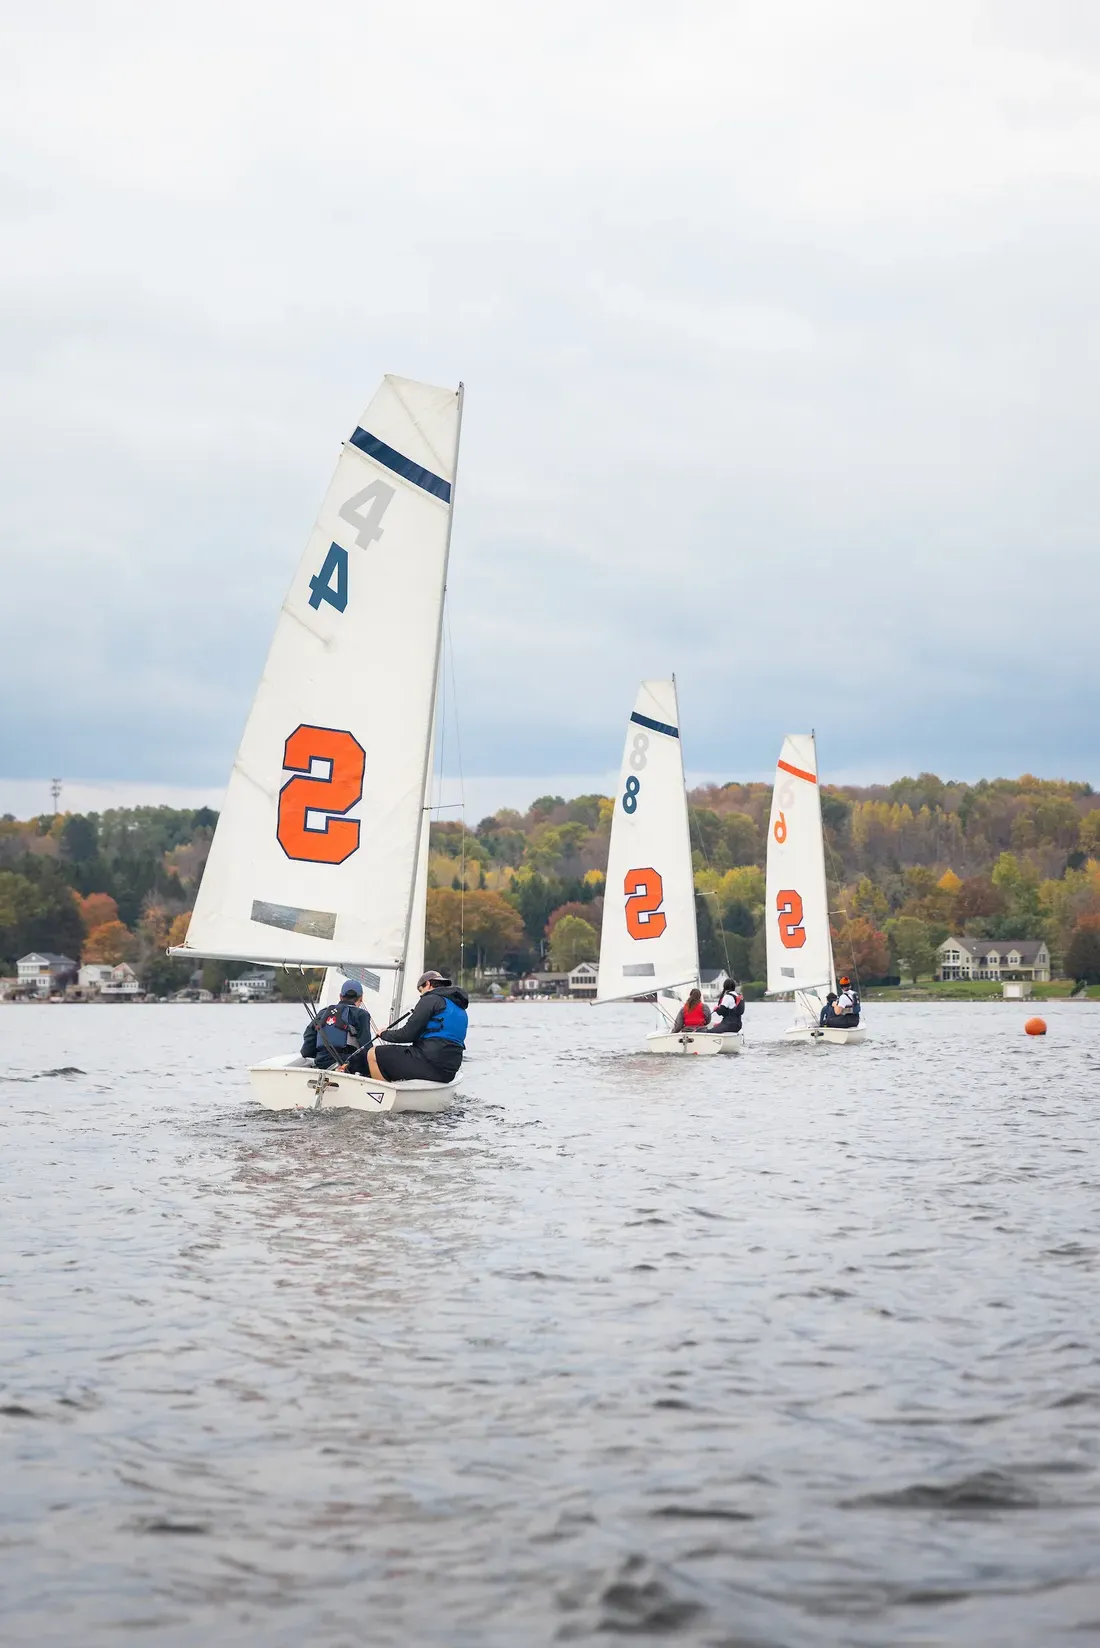 Students in the sailing club at Syracuse University.